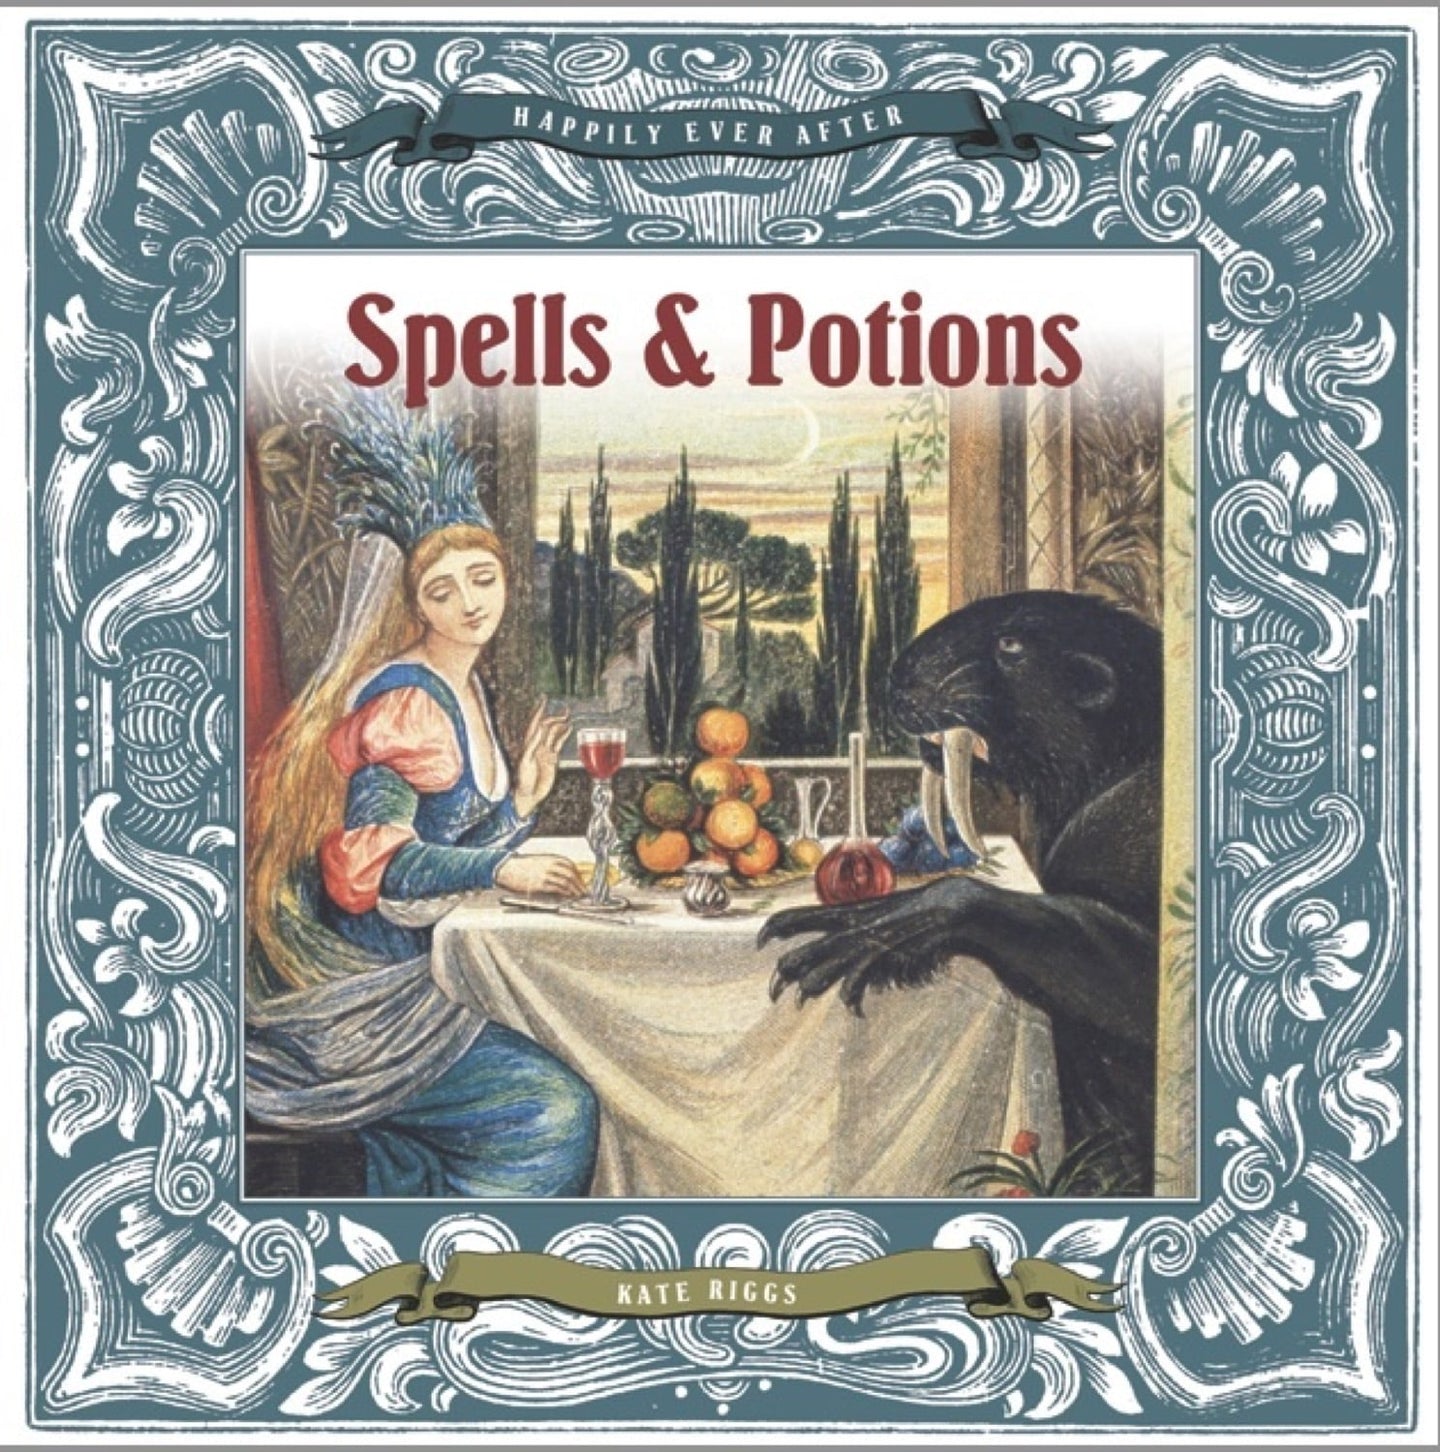 Happily Ever After: Spells & Potions